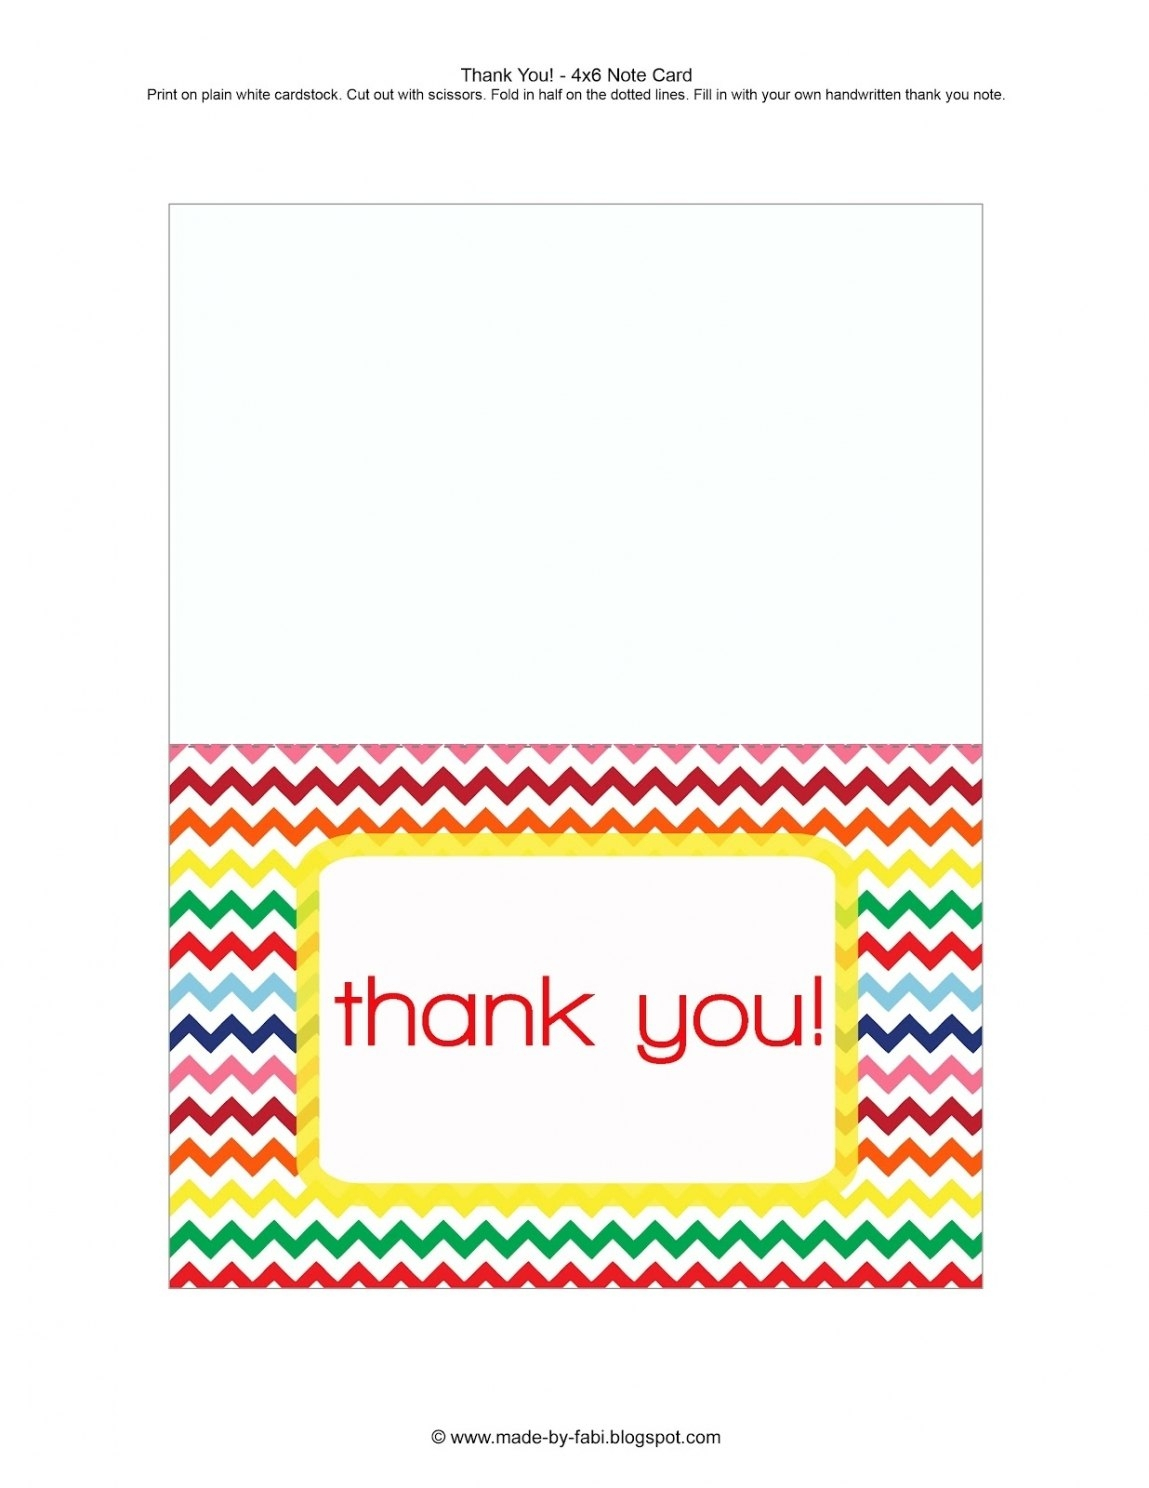 Free Printable Thank You Card Template Word | Penaime - Thank You Card Free Printable Template